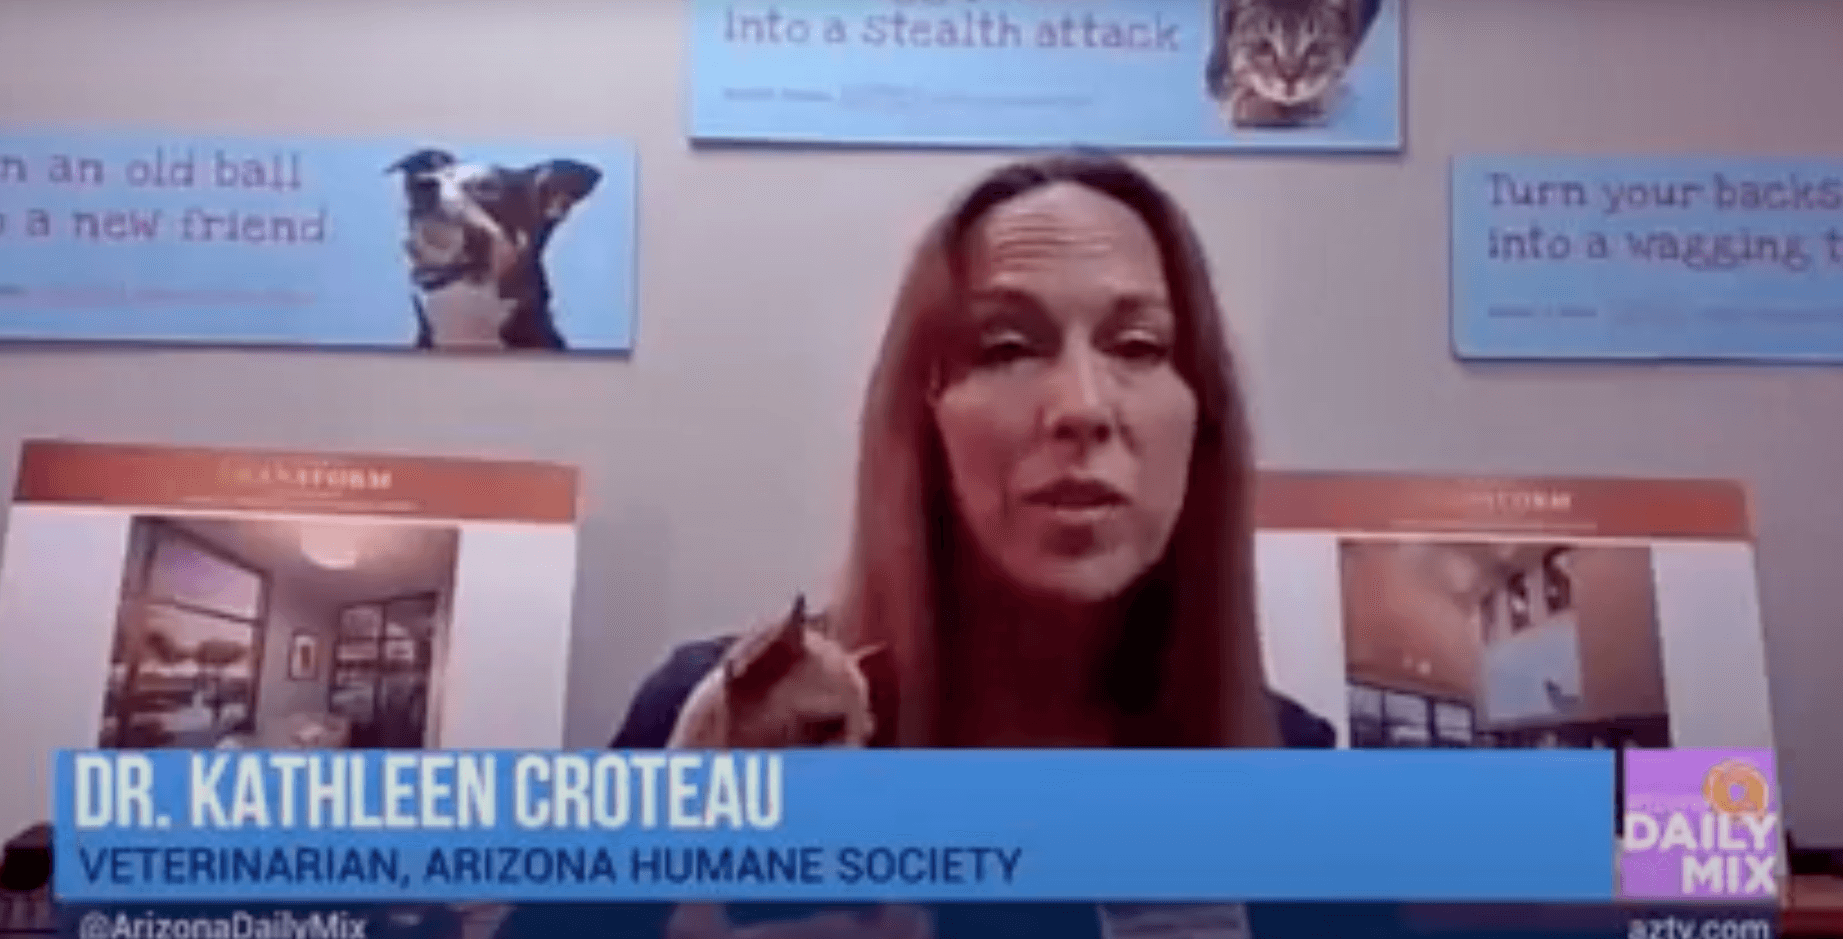 Vet, Kathleen Croteau, appears on the news